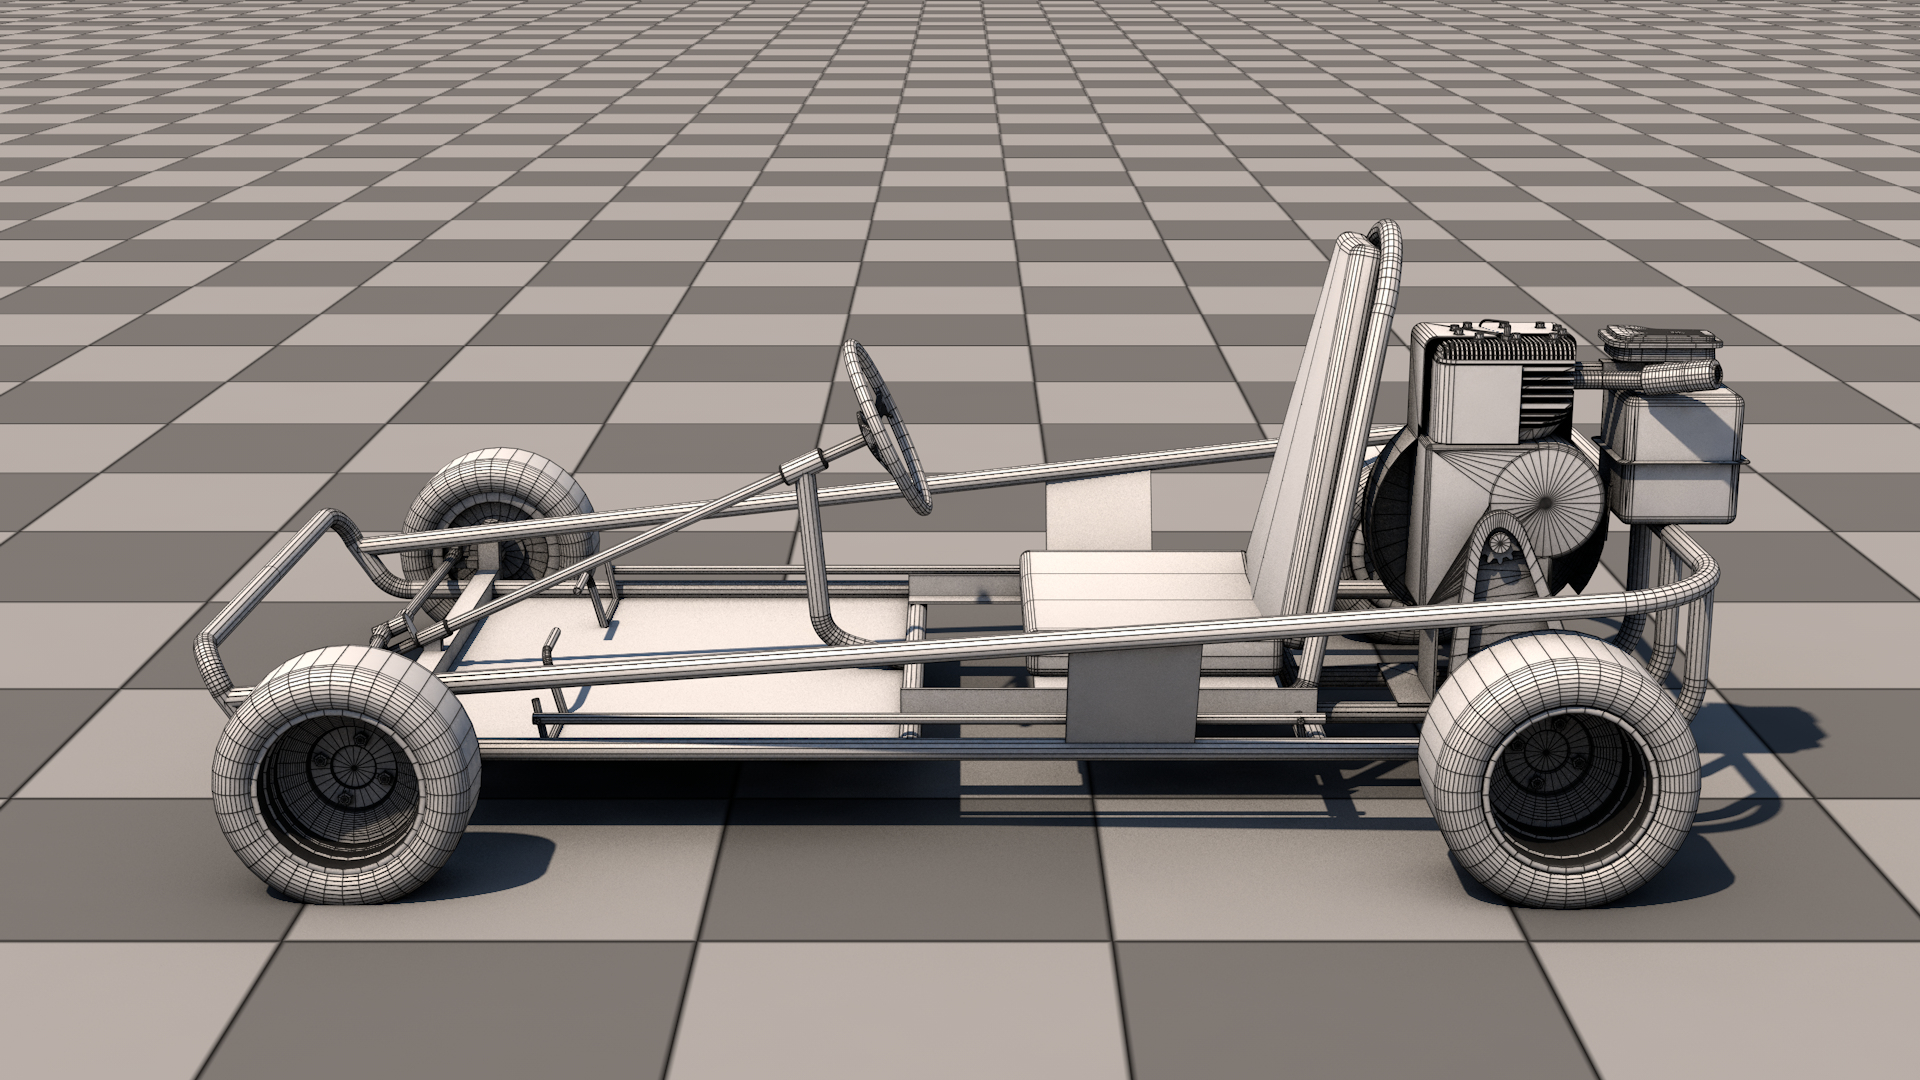 High-Poly Go-Kart With Engine 3D Model - TurboSquid 1826598